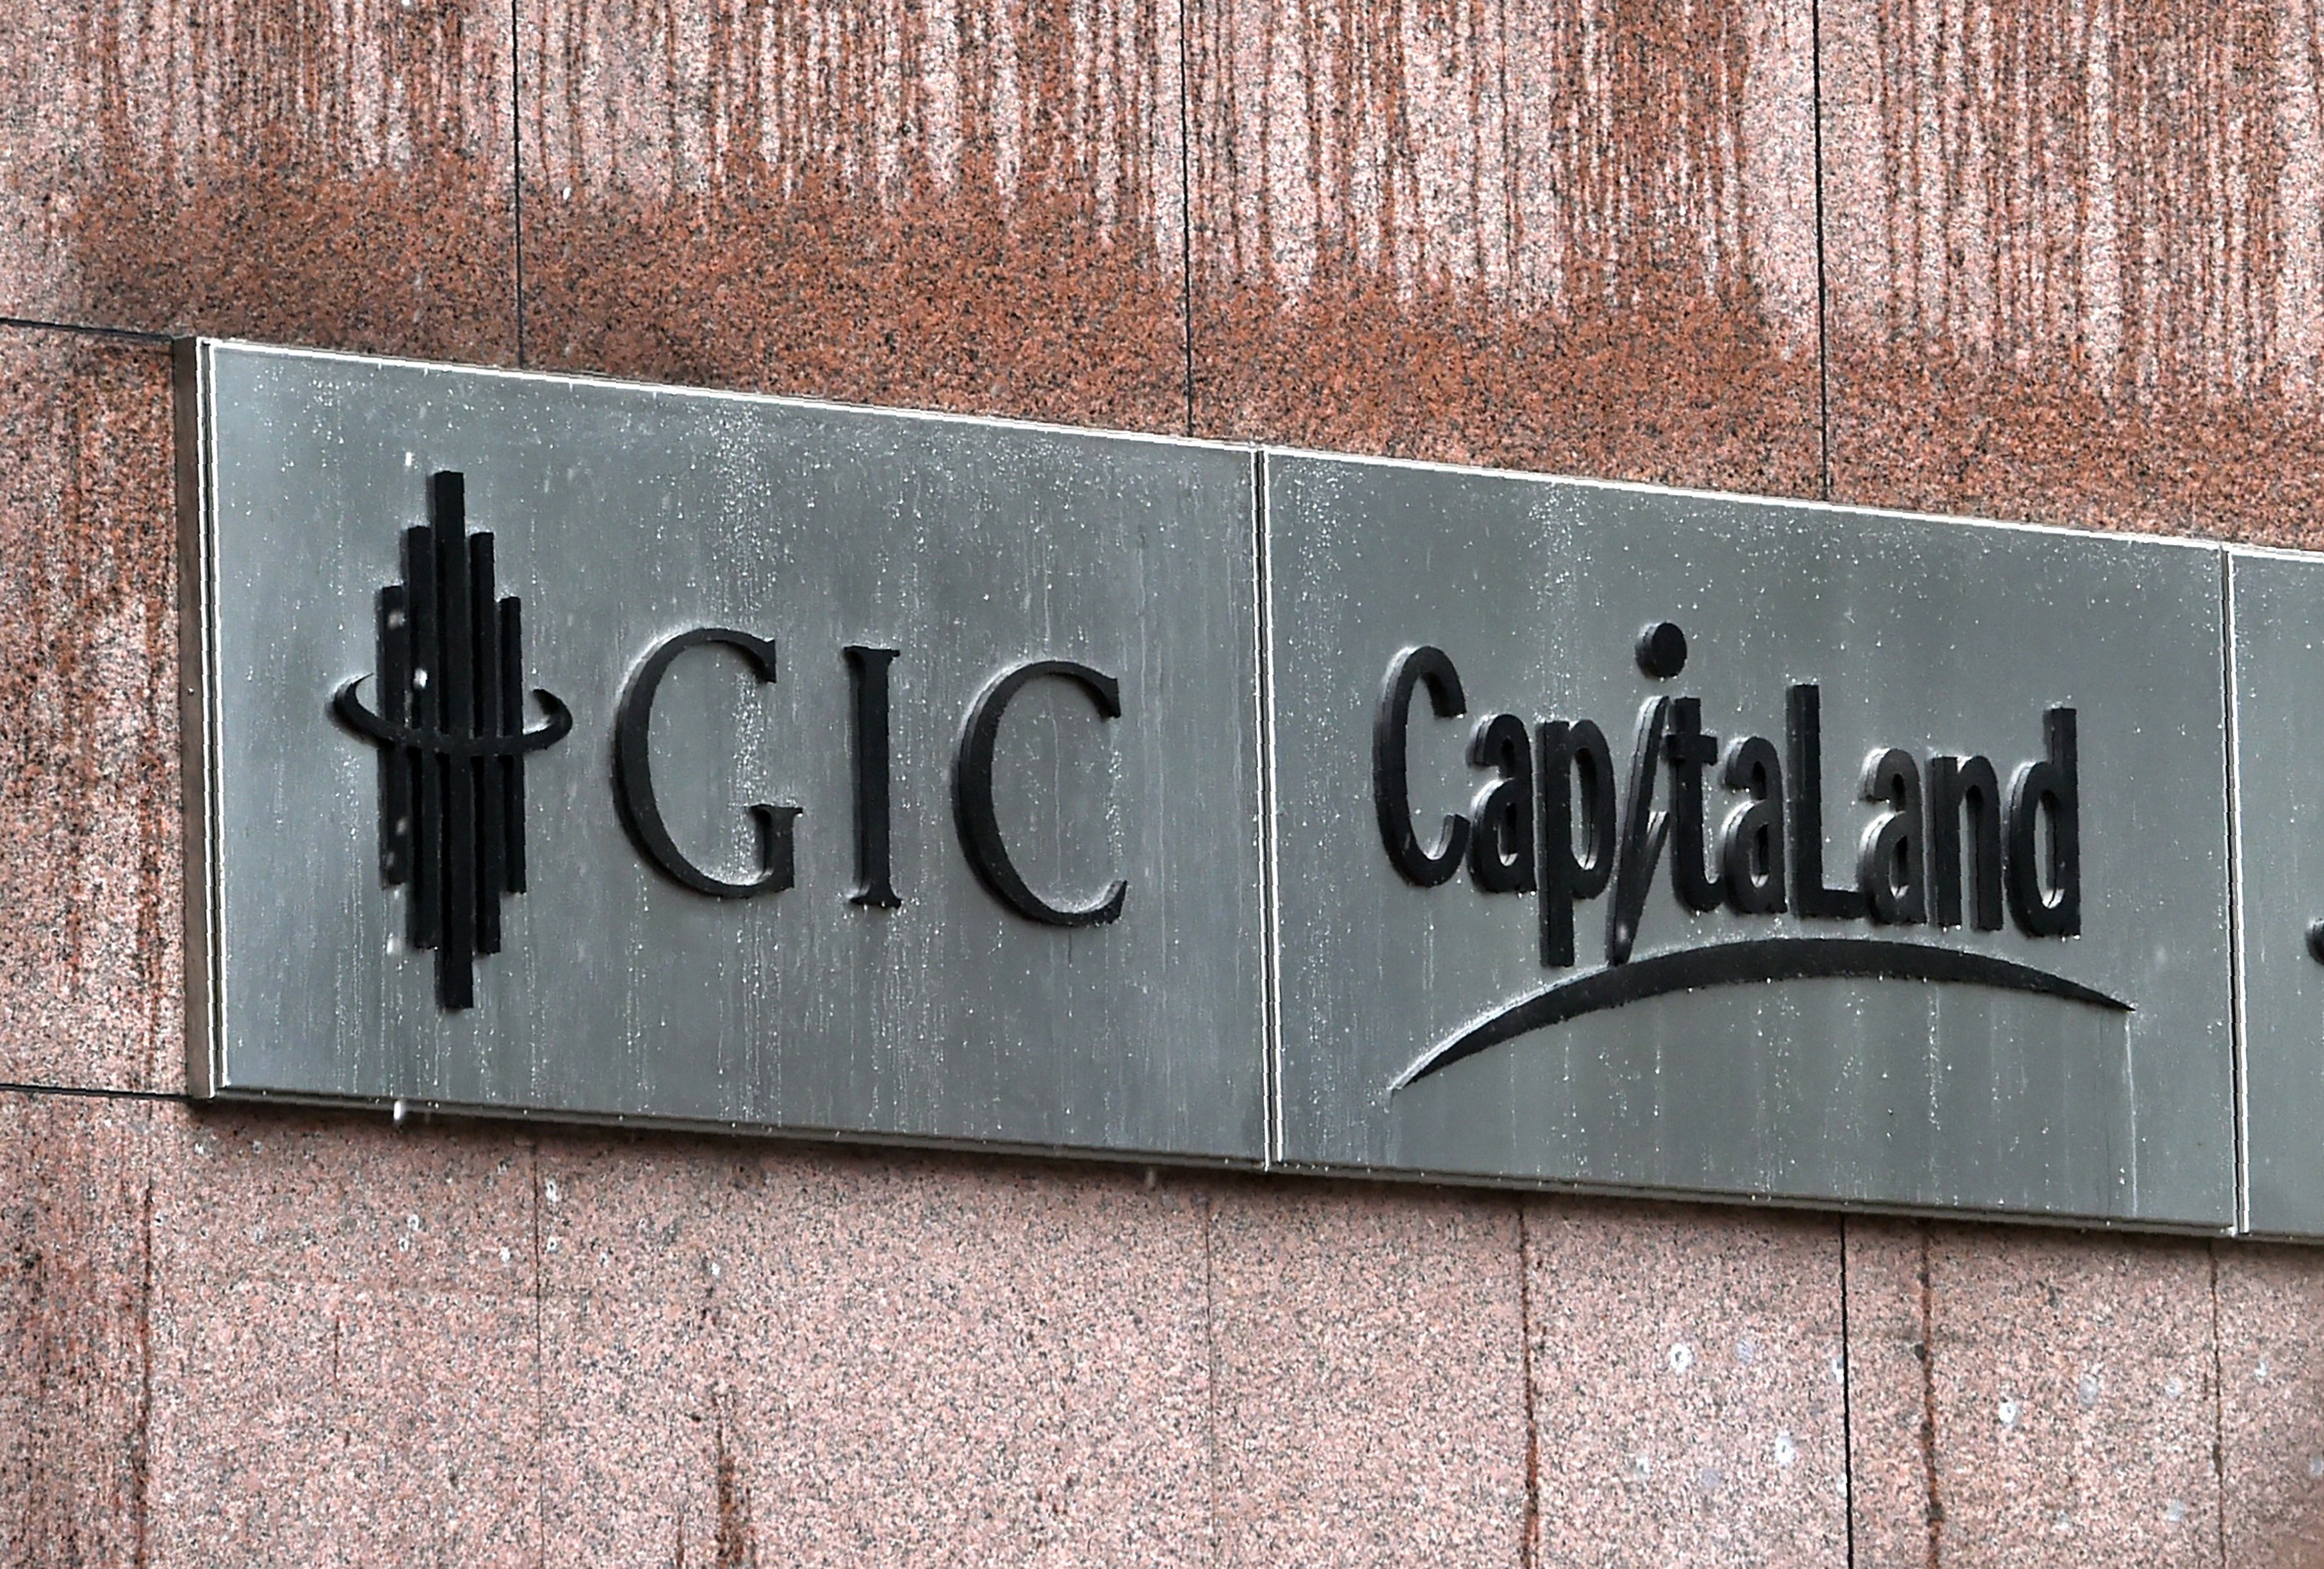 Singapore’s sovereign wealth fund GIC reshuffled the roles of some senior executives as part of a broader leadership overhaul. Photo: AFP